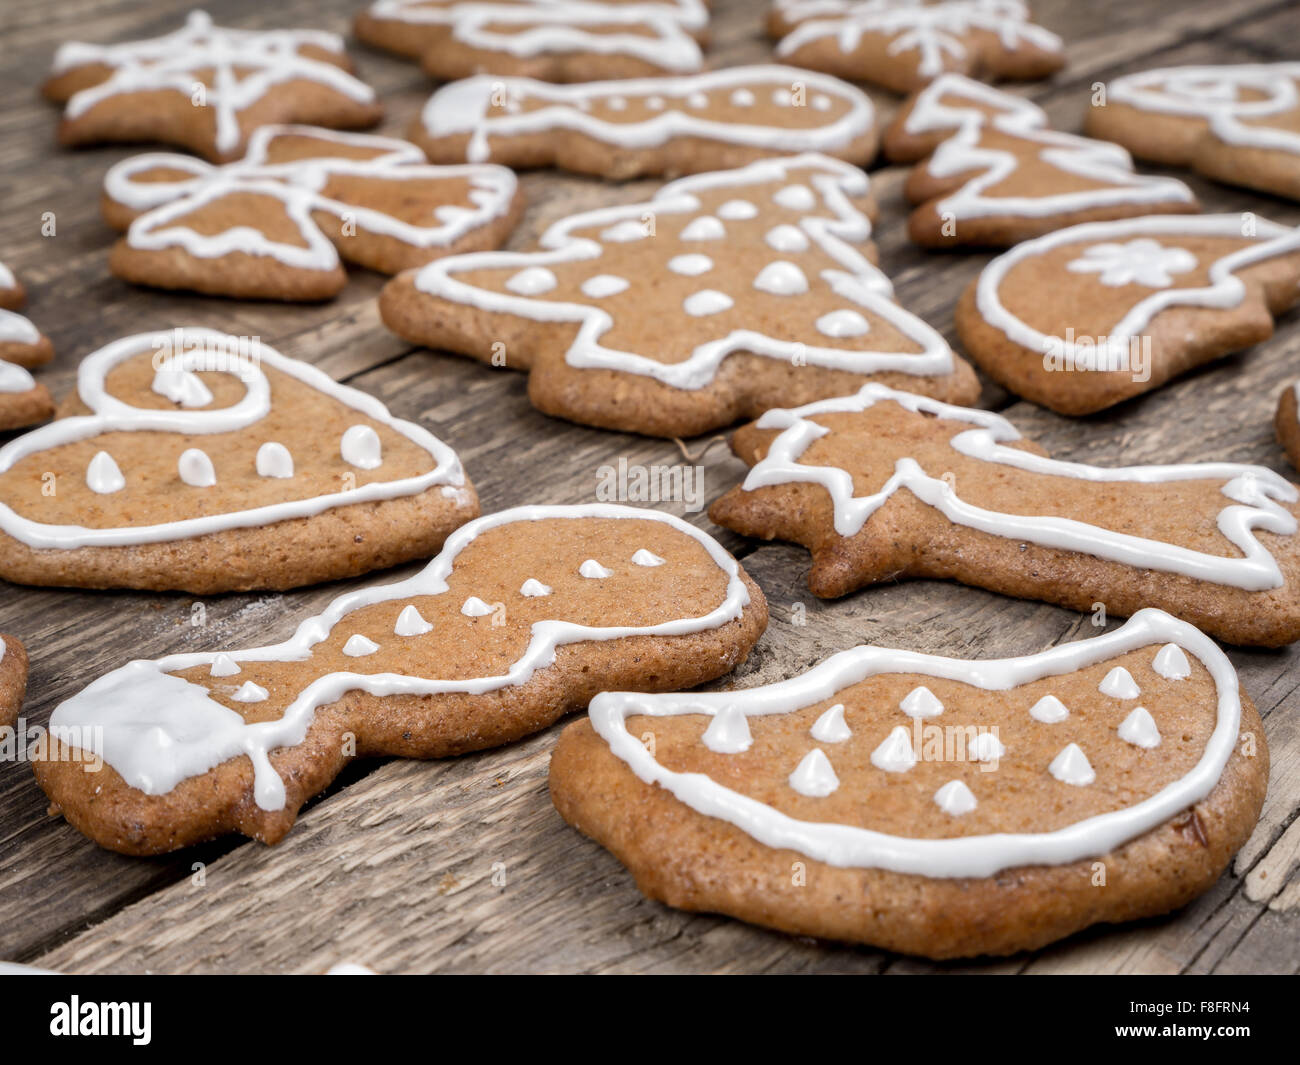 Different shape Christmas gingerbread cookies with white icing placed on wooden rustic boards Stock Photo